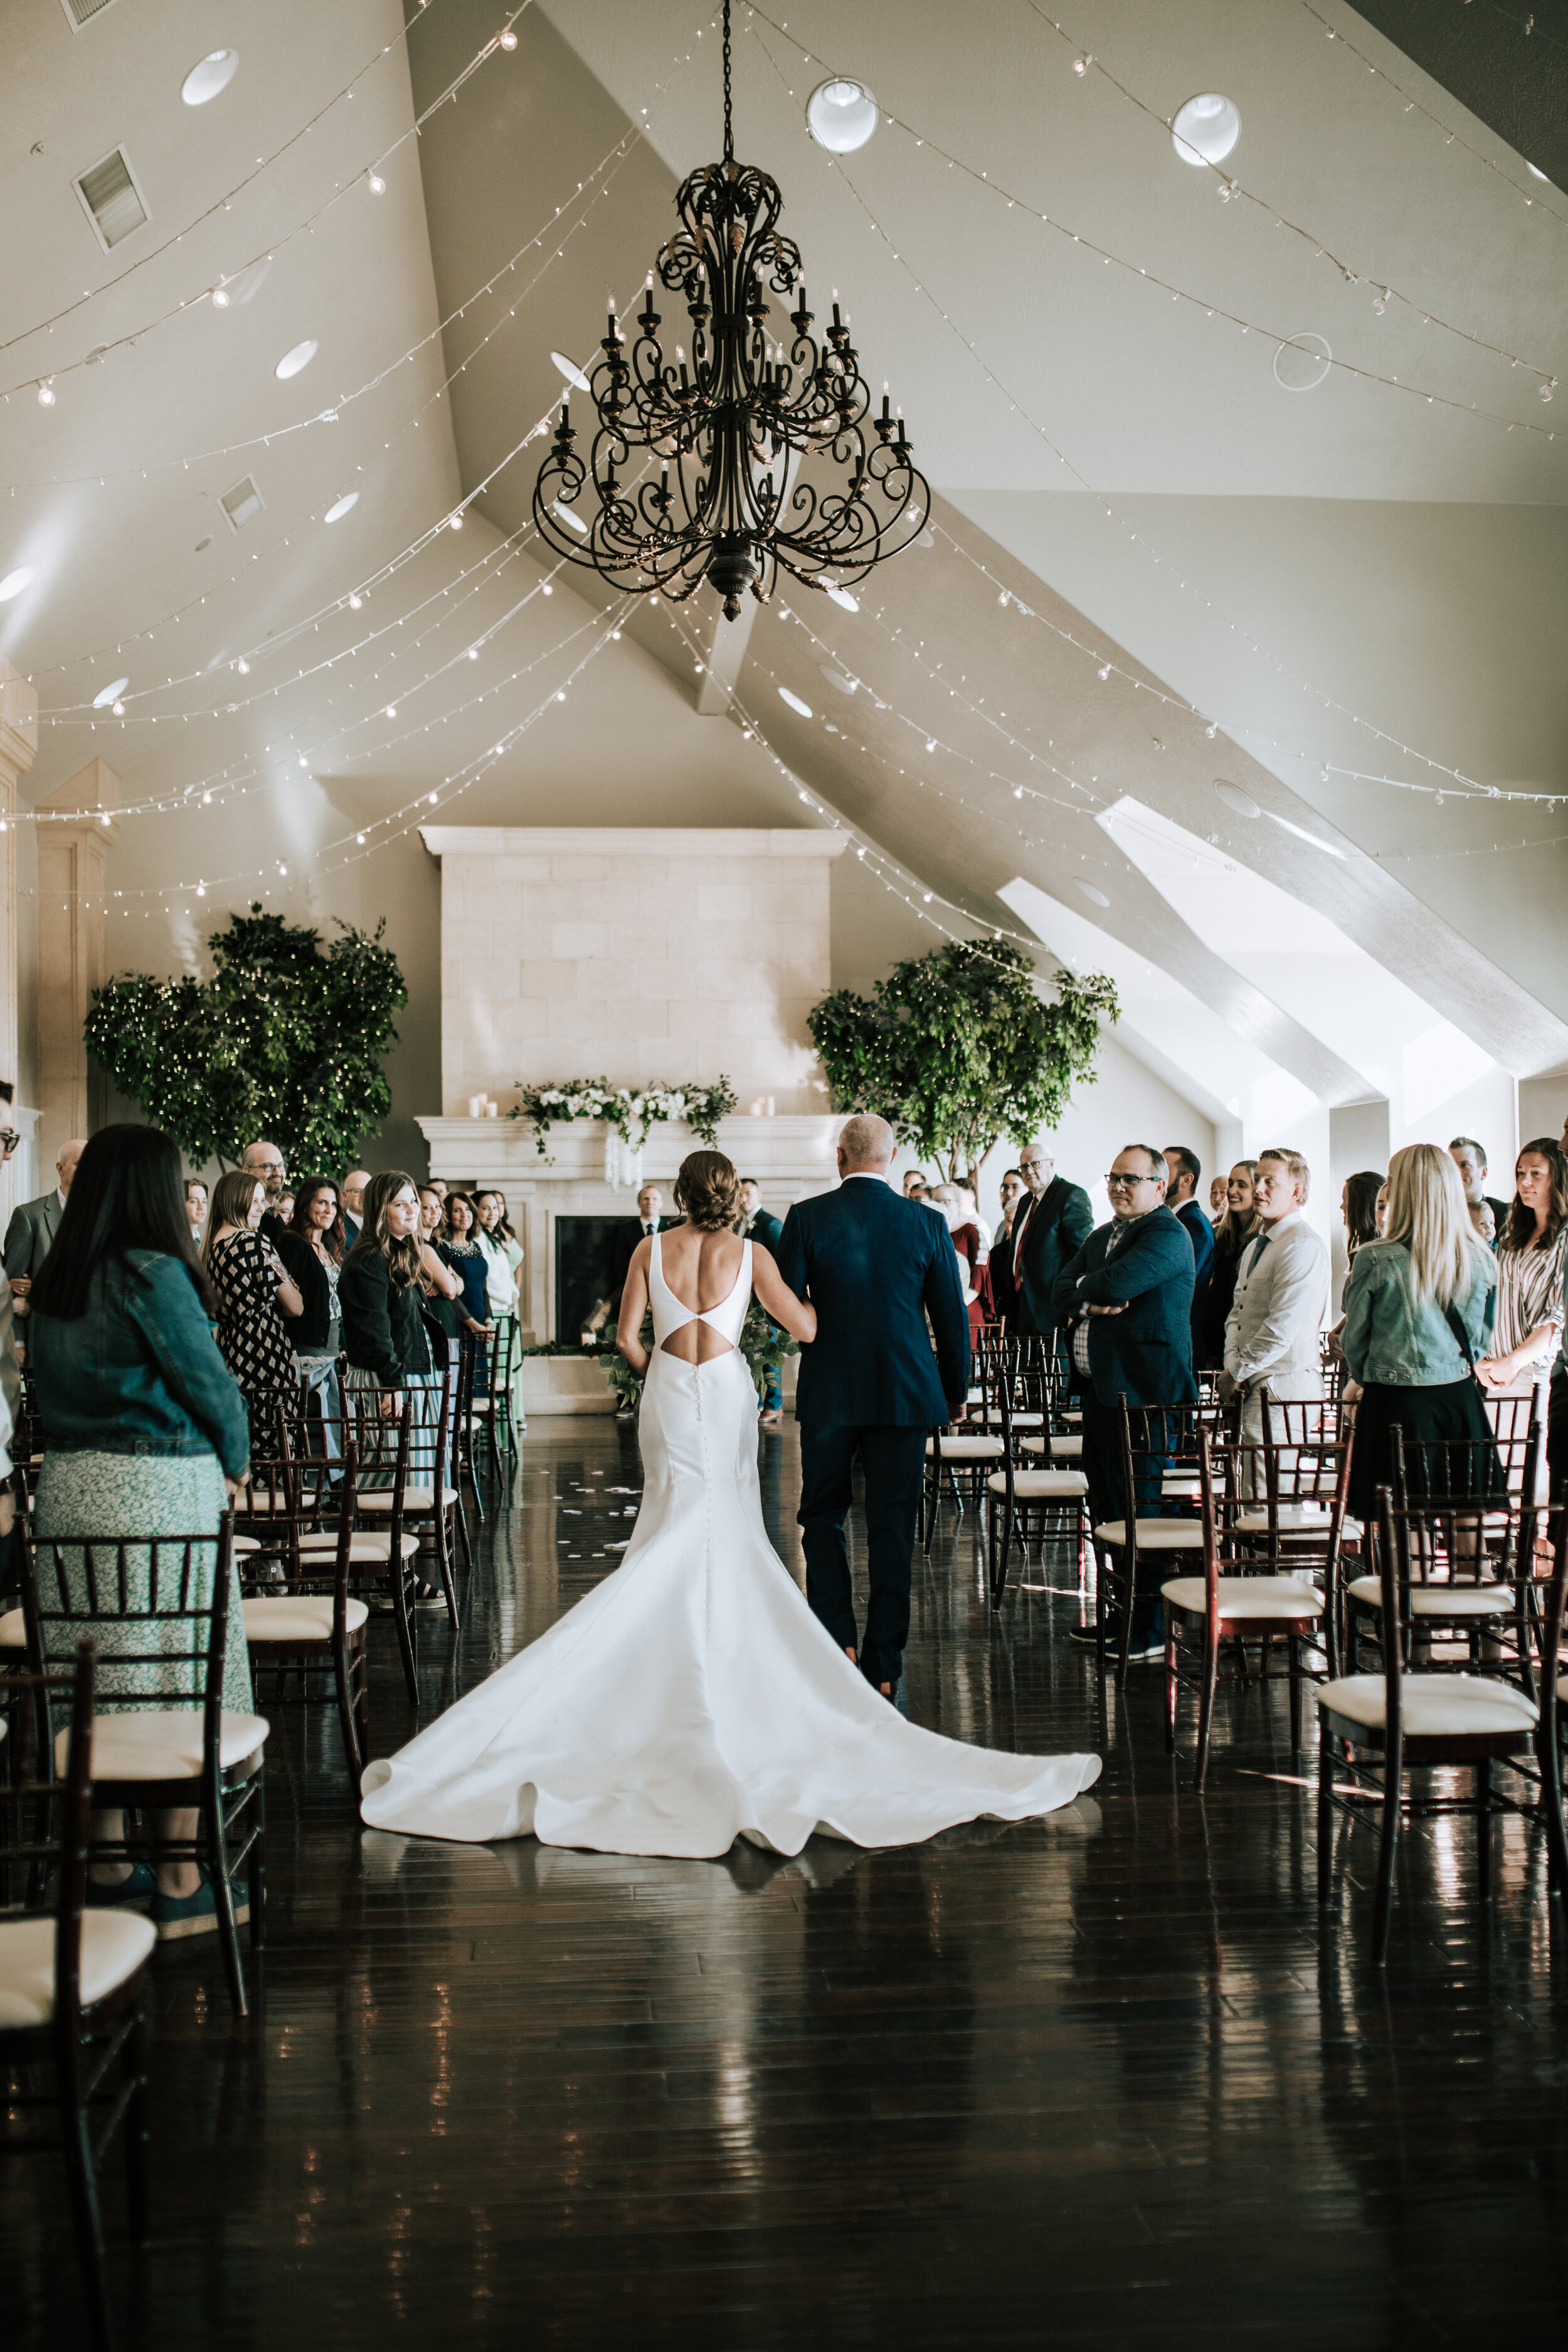  Father walks a bride down the aisle at Sleepy Ridge Golf Course with a tall ceiling with a chandelier and little lights hanging from the ceiling by Emily Jenkins Photography. bride walks down the aisle here comes the bride #emilyjenkinsphotography #